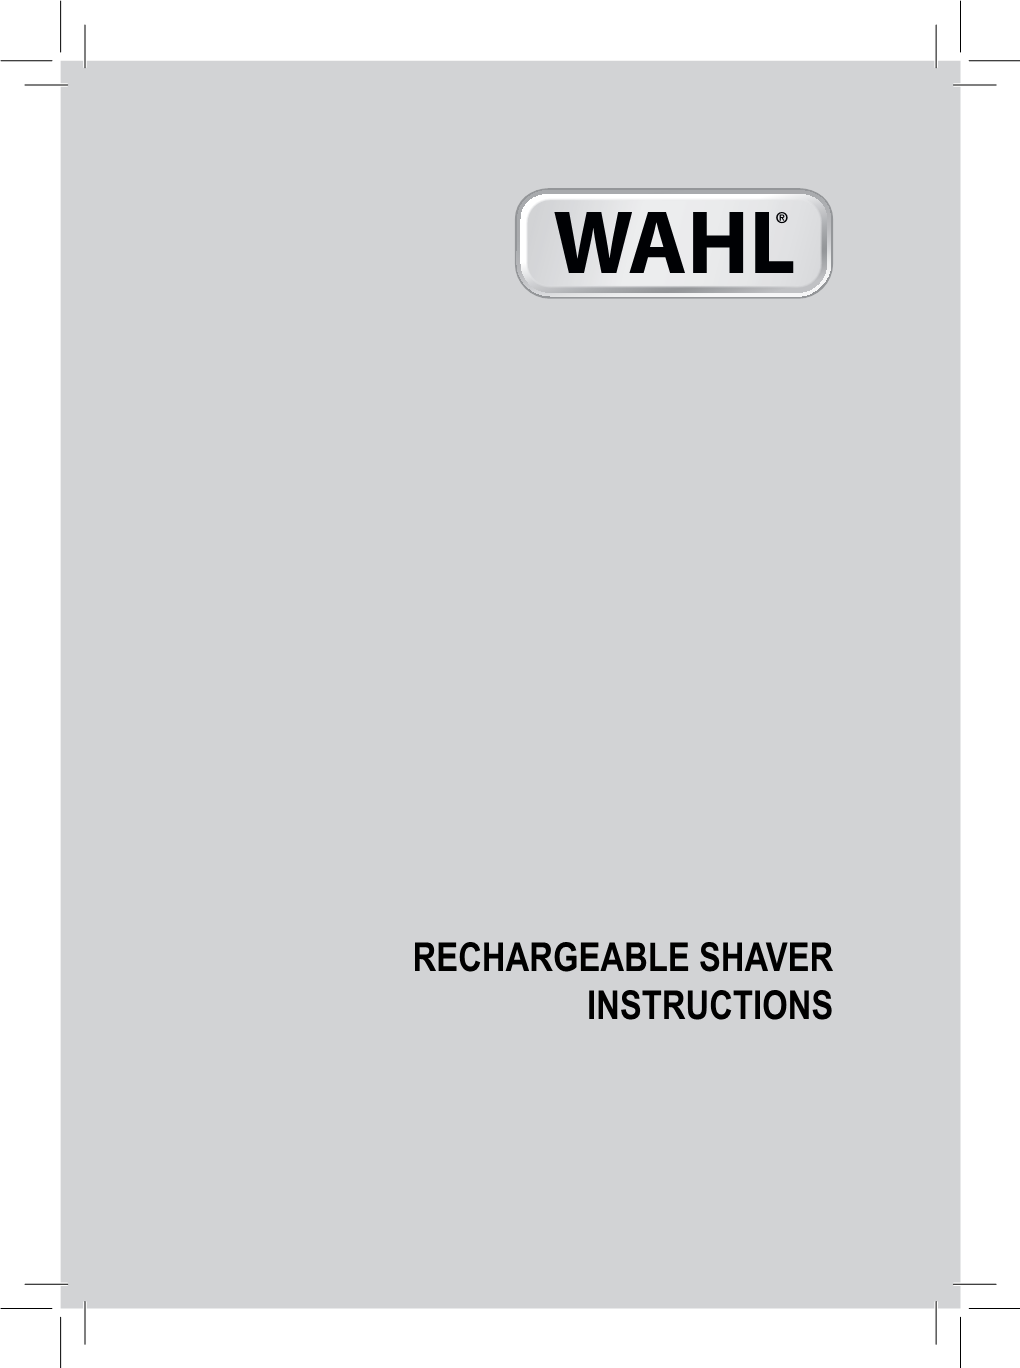 Rechargeable Shaver Instructions